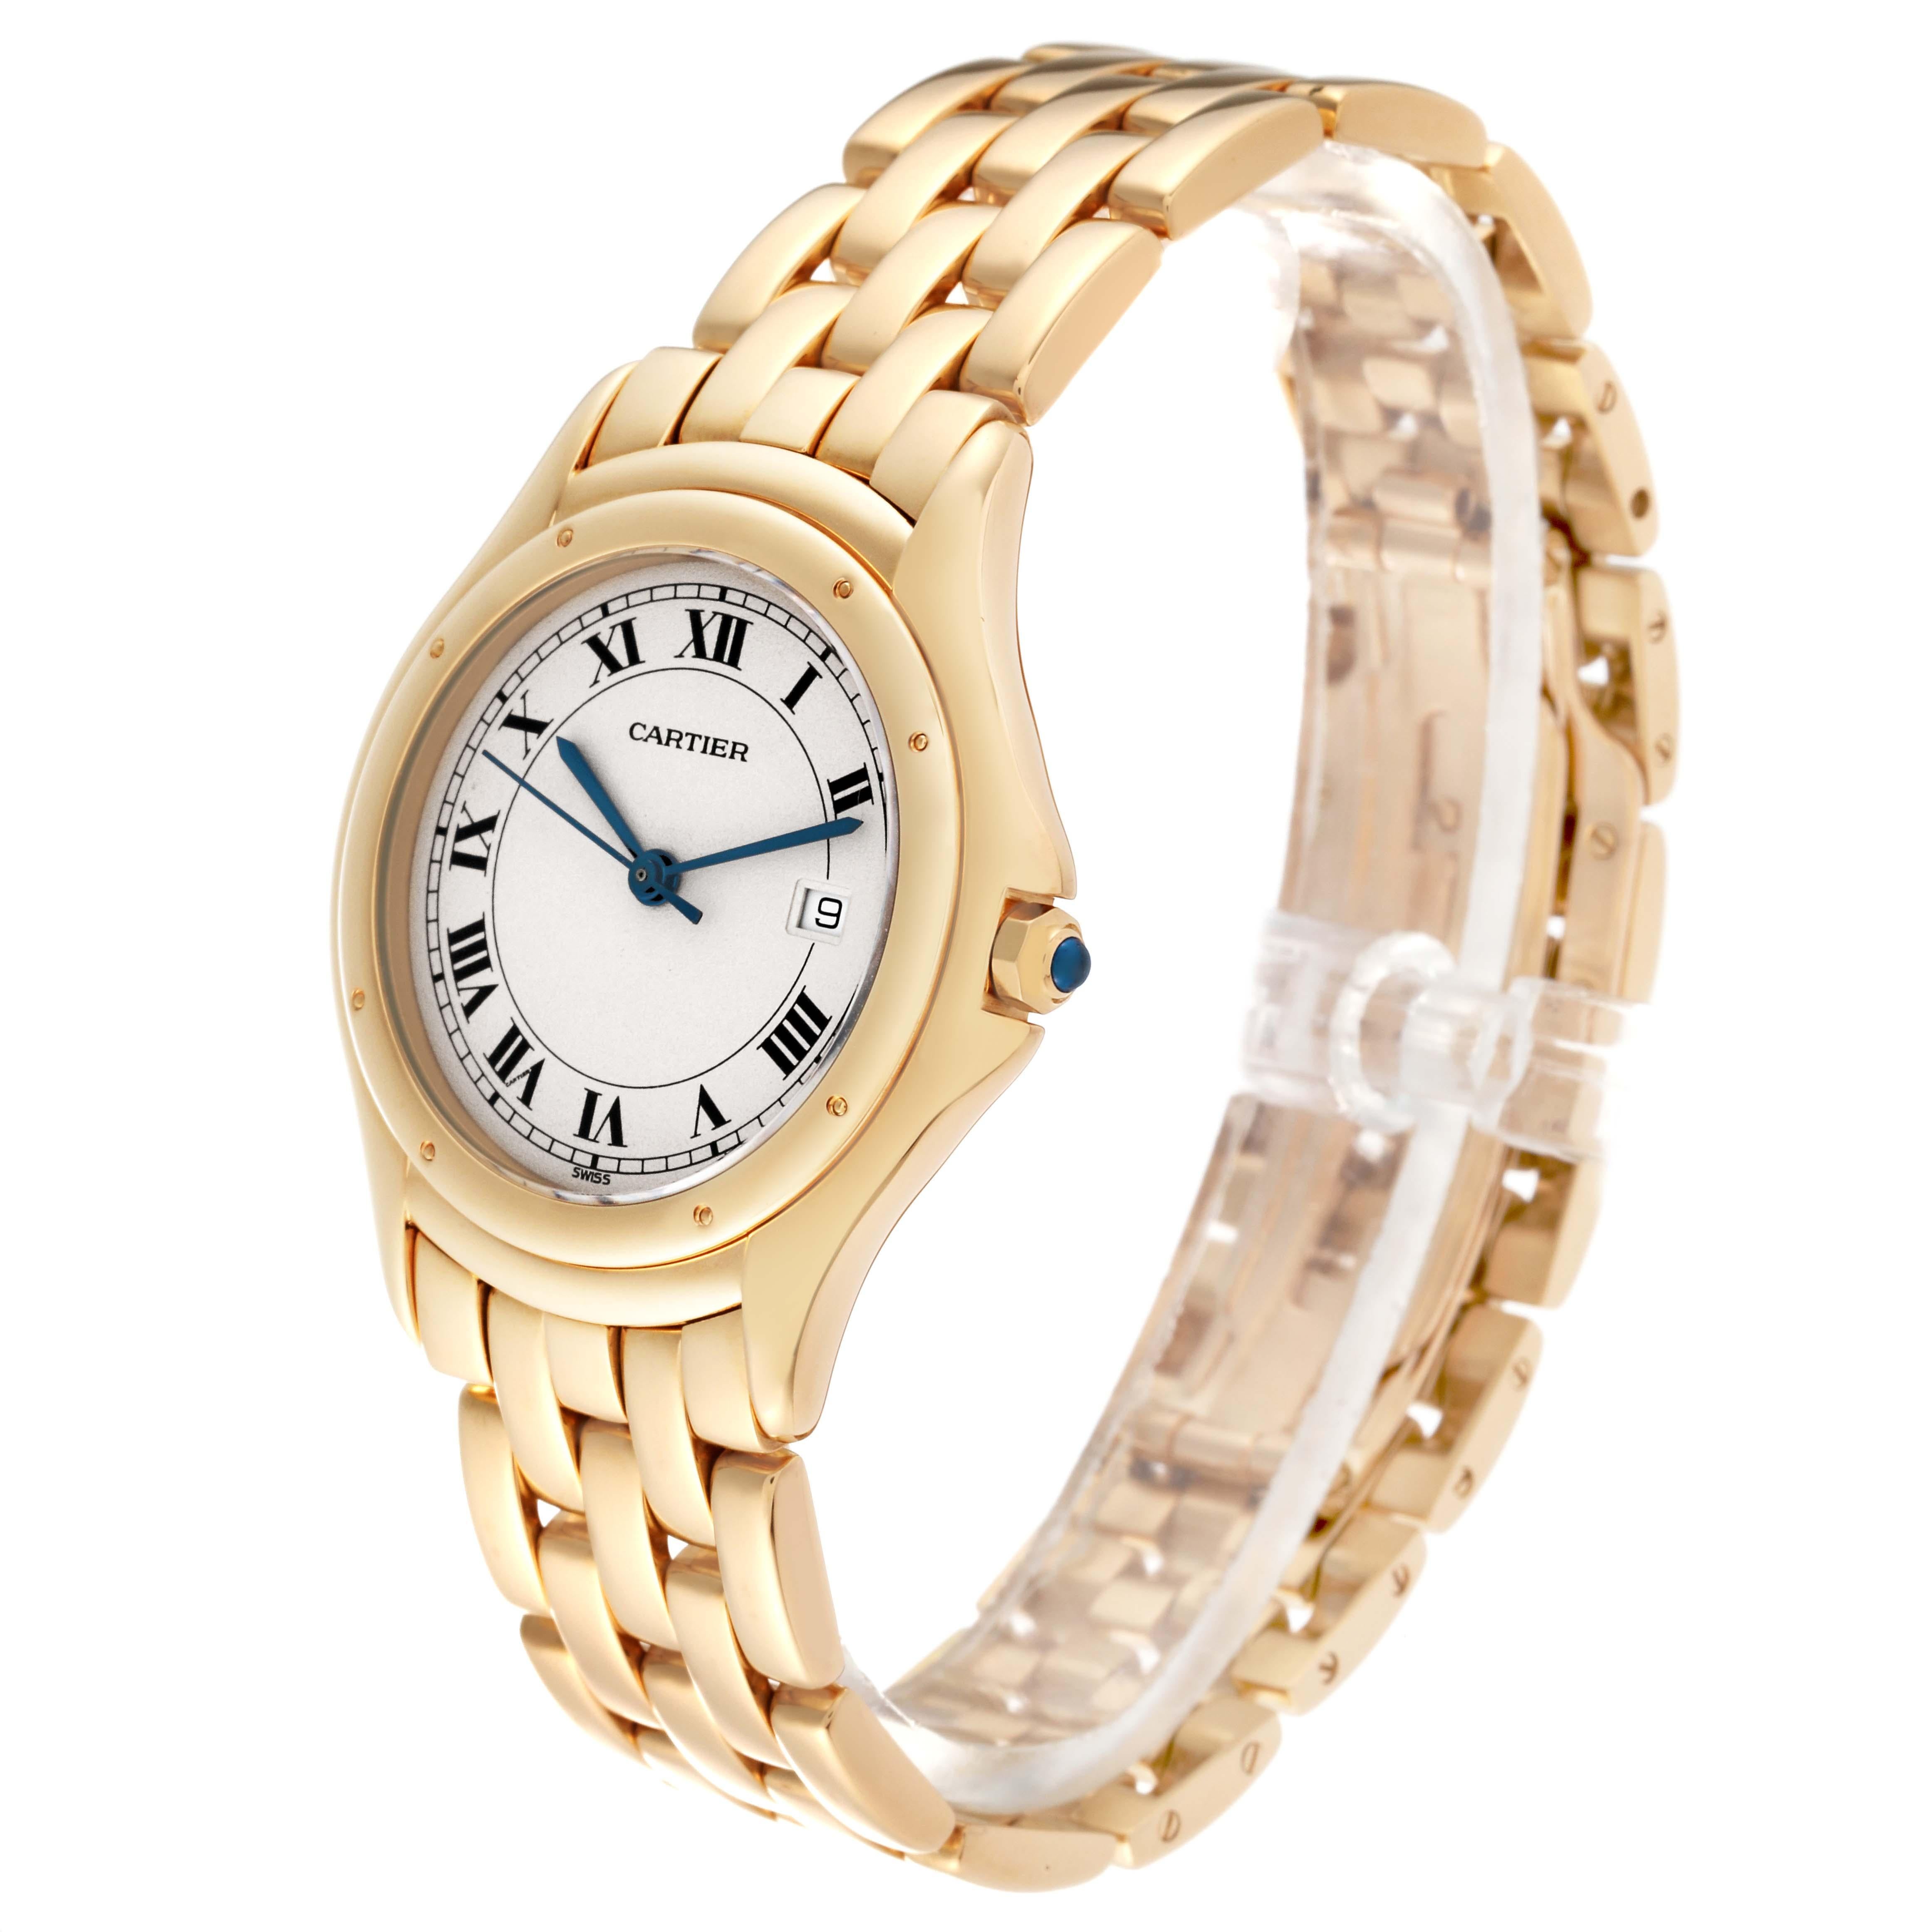 Cartier Cougar Yellow Gold Silver Dial Ladies Watch 887904 For Sale 4